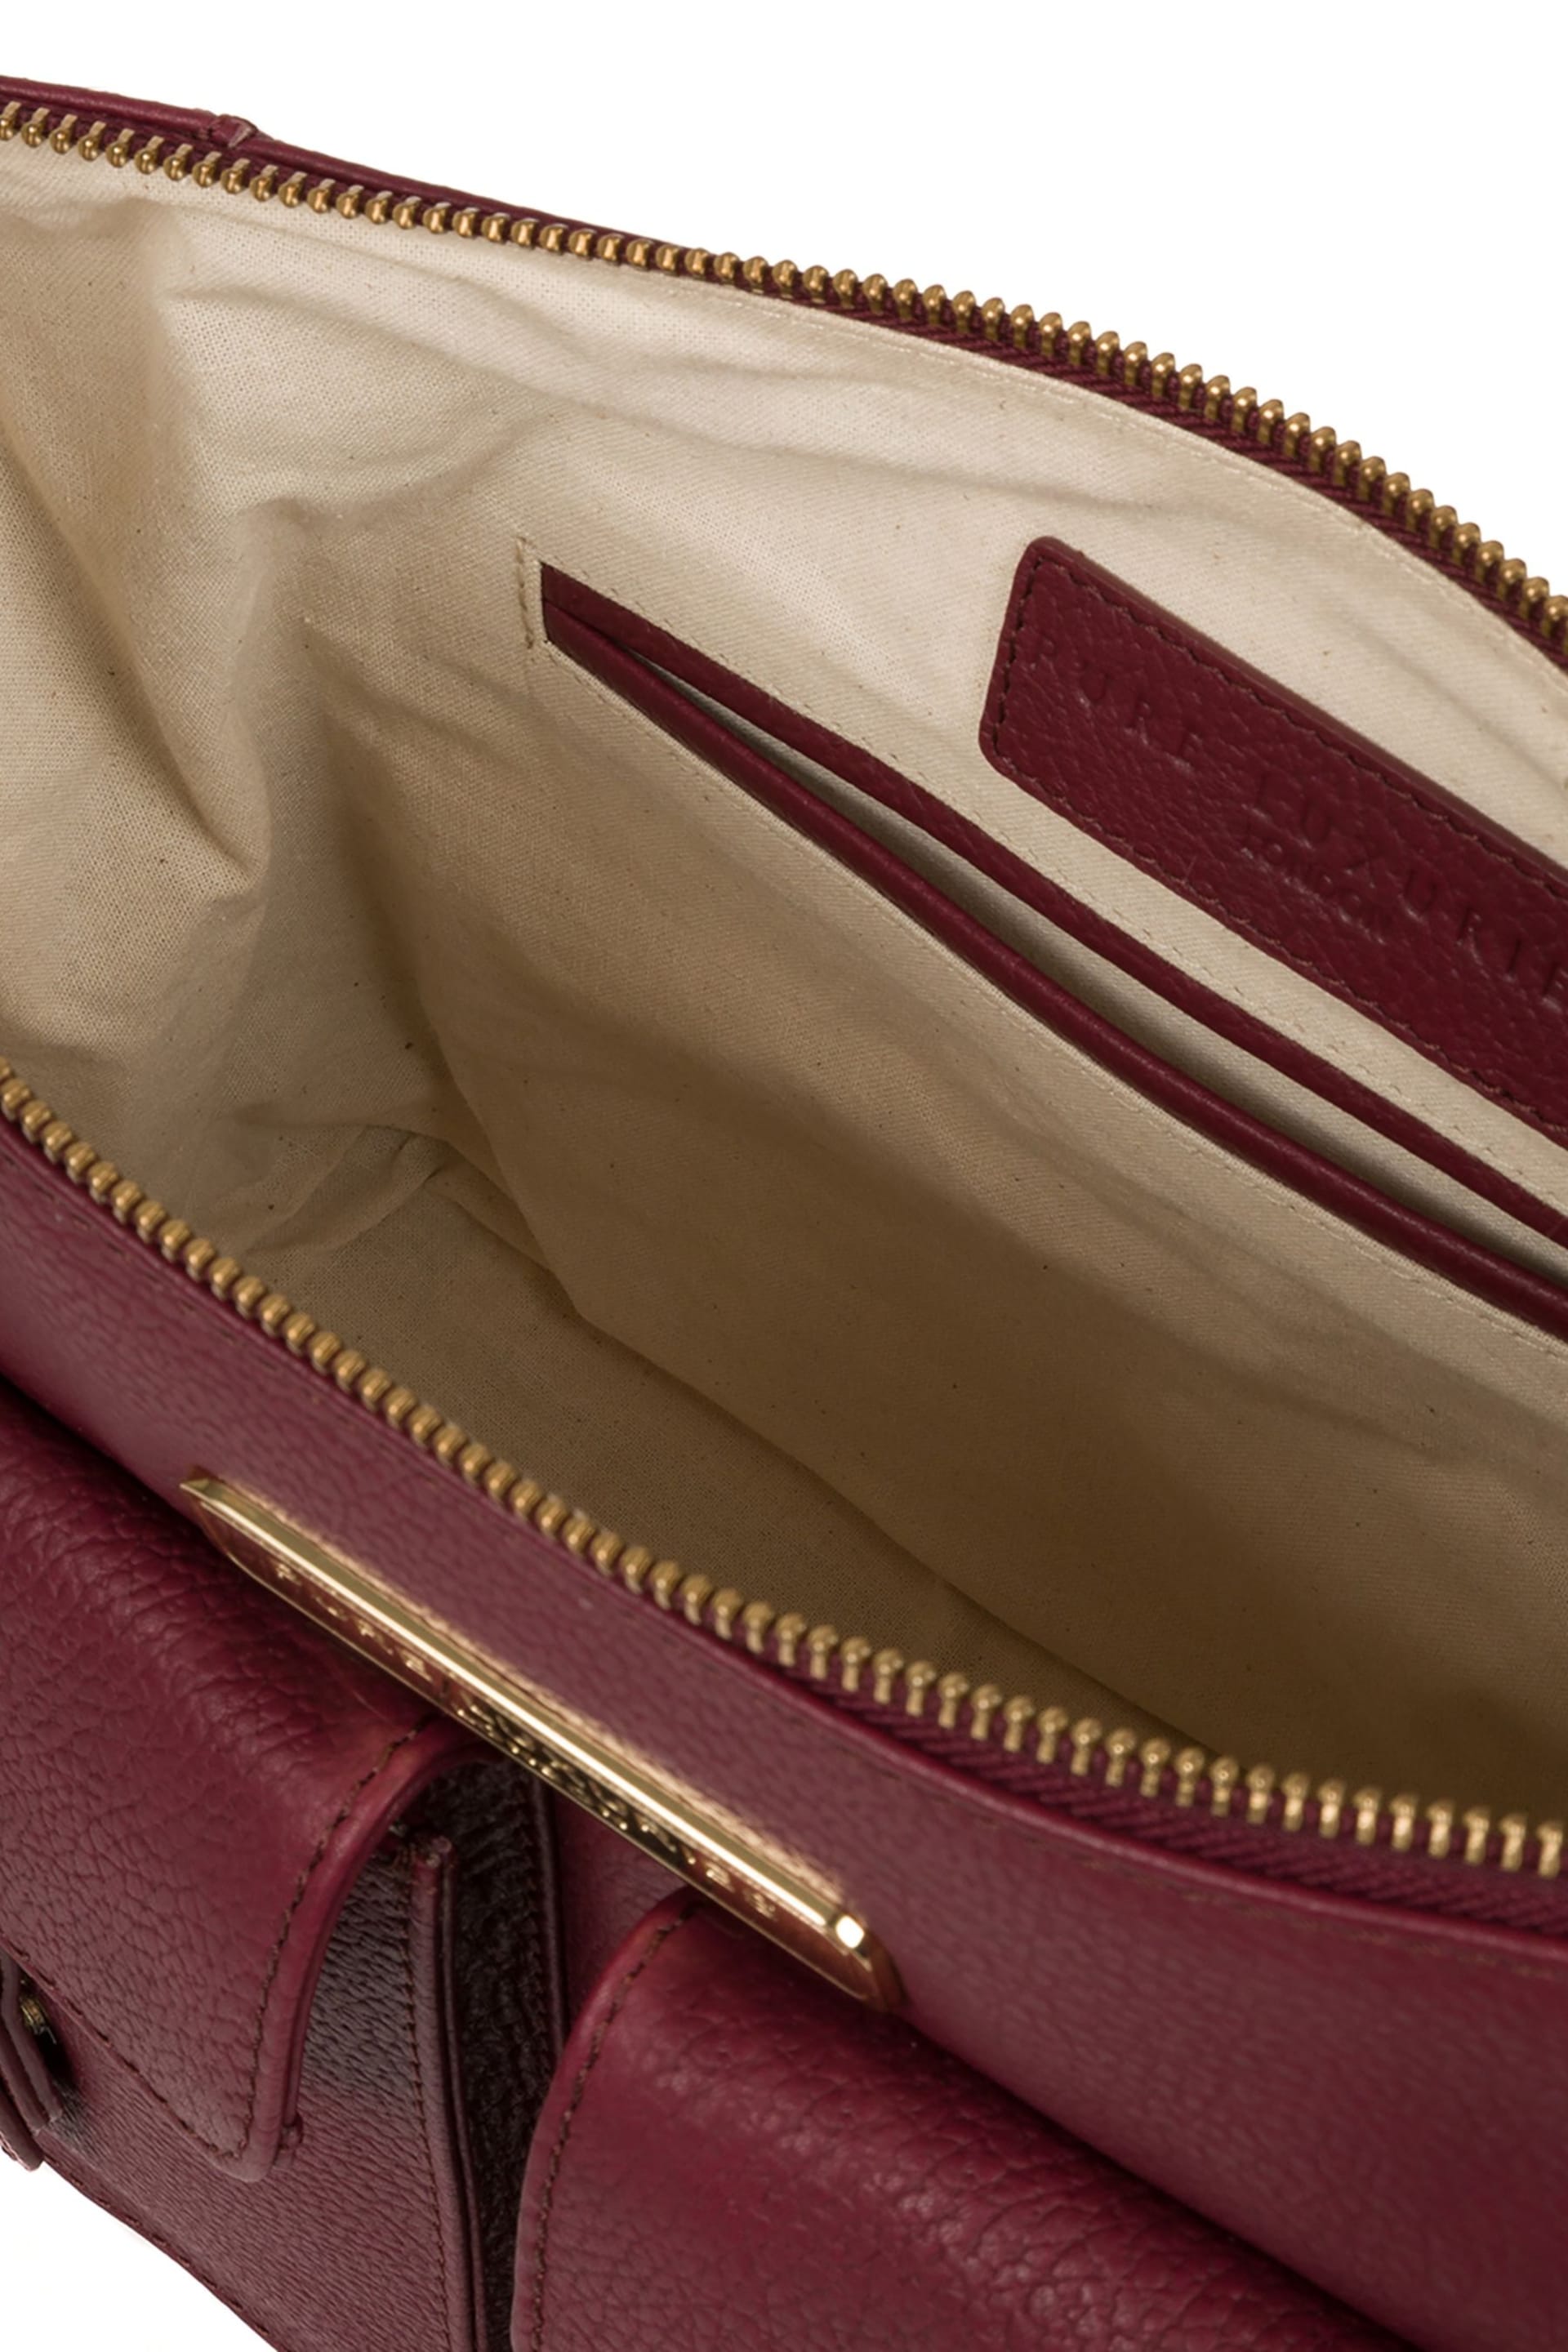 Pure Luxuries London Jenna Leather Shoulder Bag - Image 4 of 5